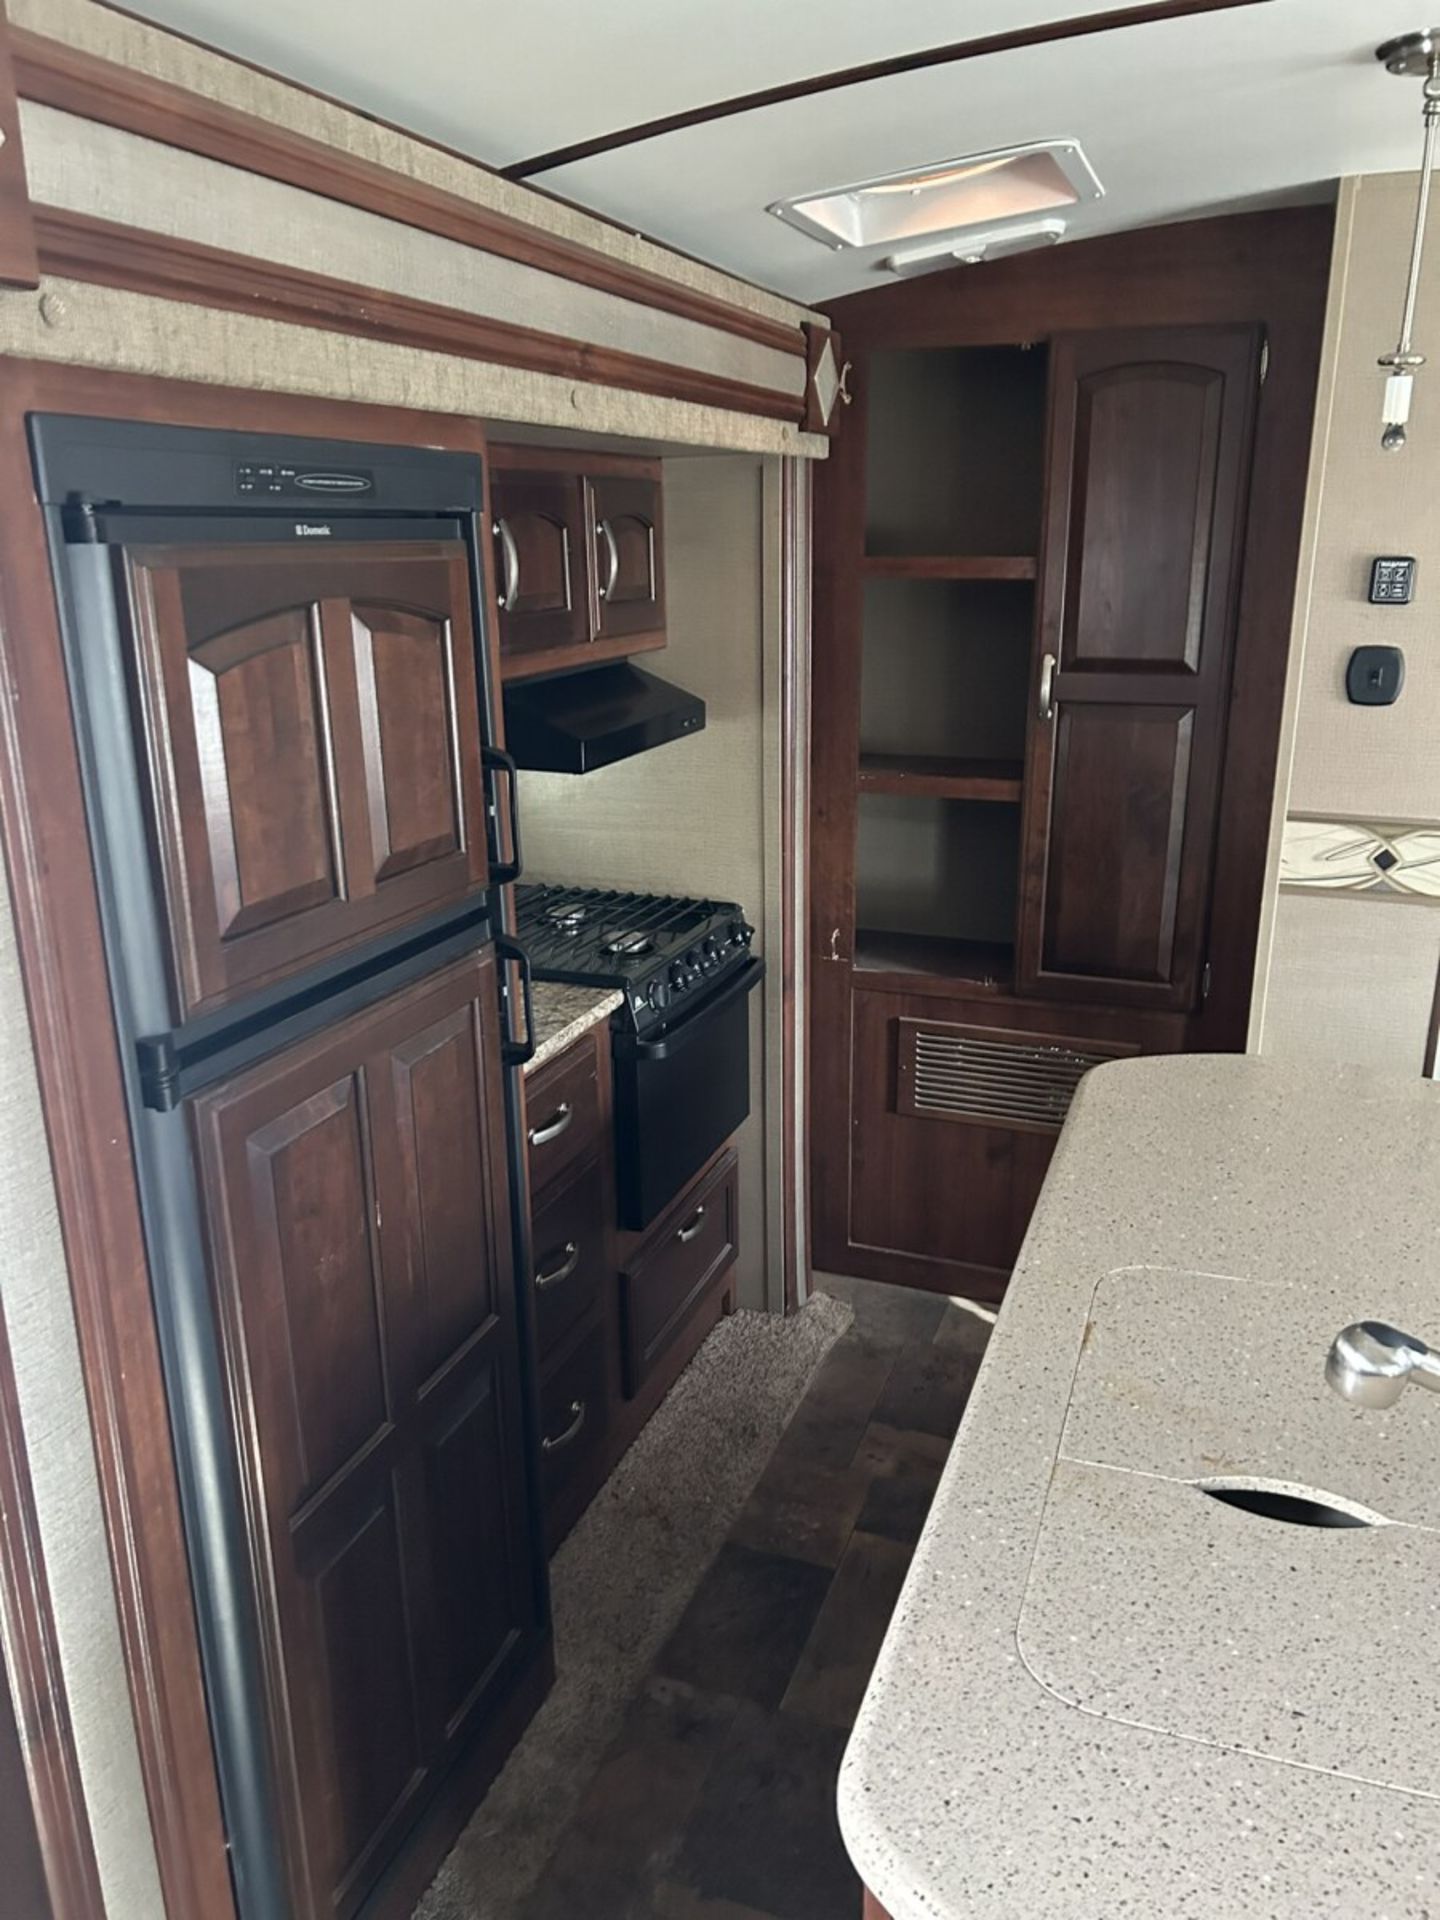 2014 OUTBACK KEYSTONE SUPER-LITE 33 FT HOLIDAY TRAILER, DOUBLE SLIDE, POWER AWNING, OUTDOOR KITCHEN, - Image 11 of 15